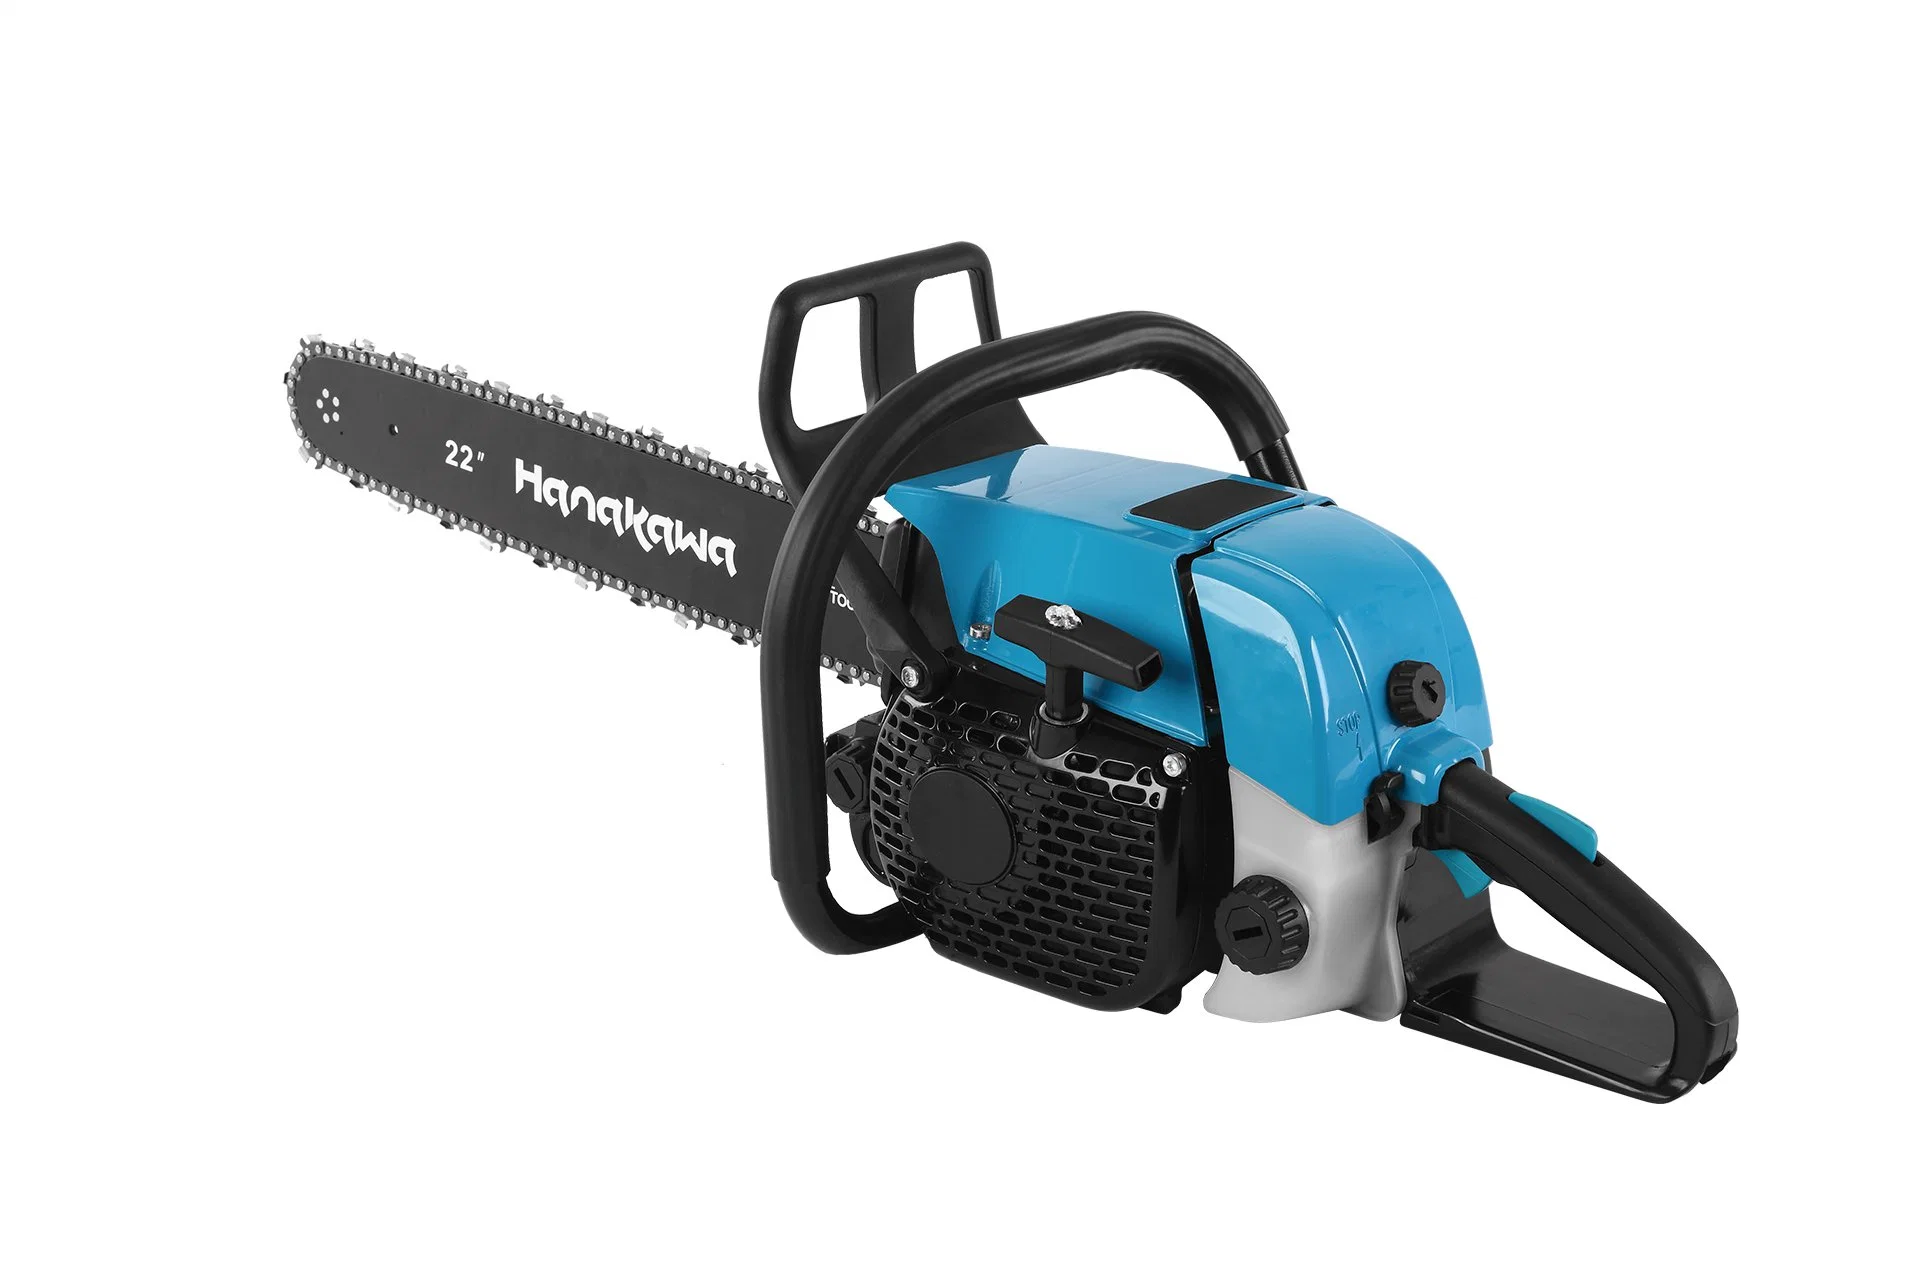 Hanakawa H972E(038) Power Chain Saws, Gas Powered Chainsaw 2 Stroke Handed Petrol Gasoline Chain Saw for Cutting Wood Outdoor Garden Farm Home Use with Tool Kit